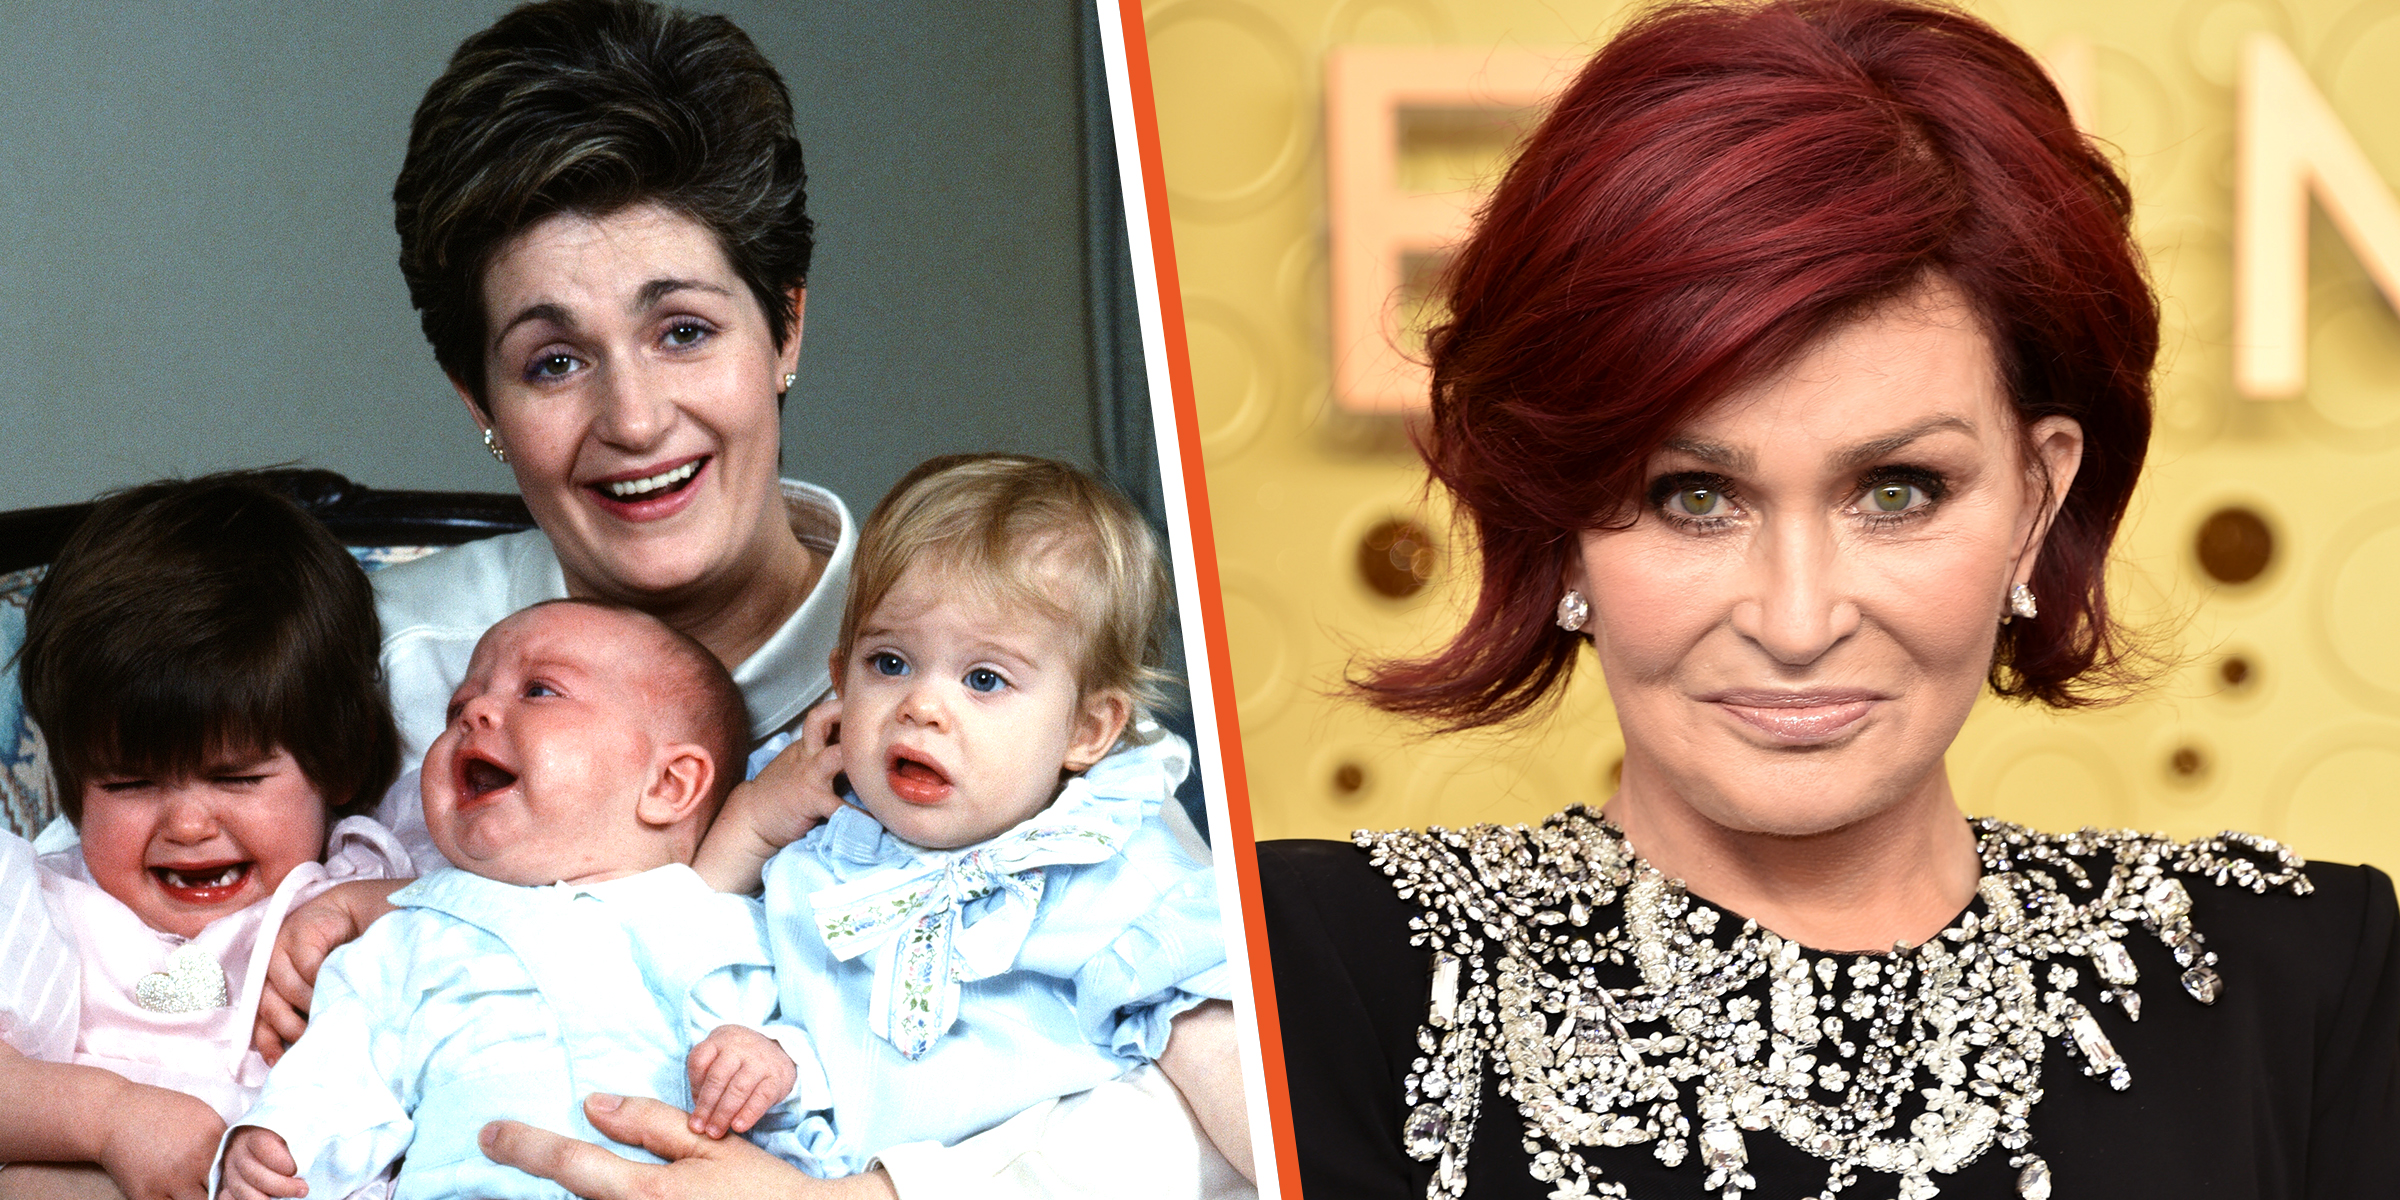 Sharon Osbourne, and her kids Aimee, Kelly, and Jack | Sharon Osbourne | Source: Getty Images